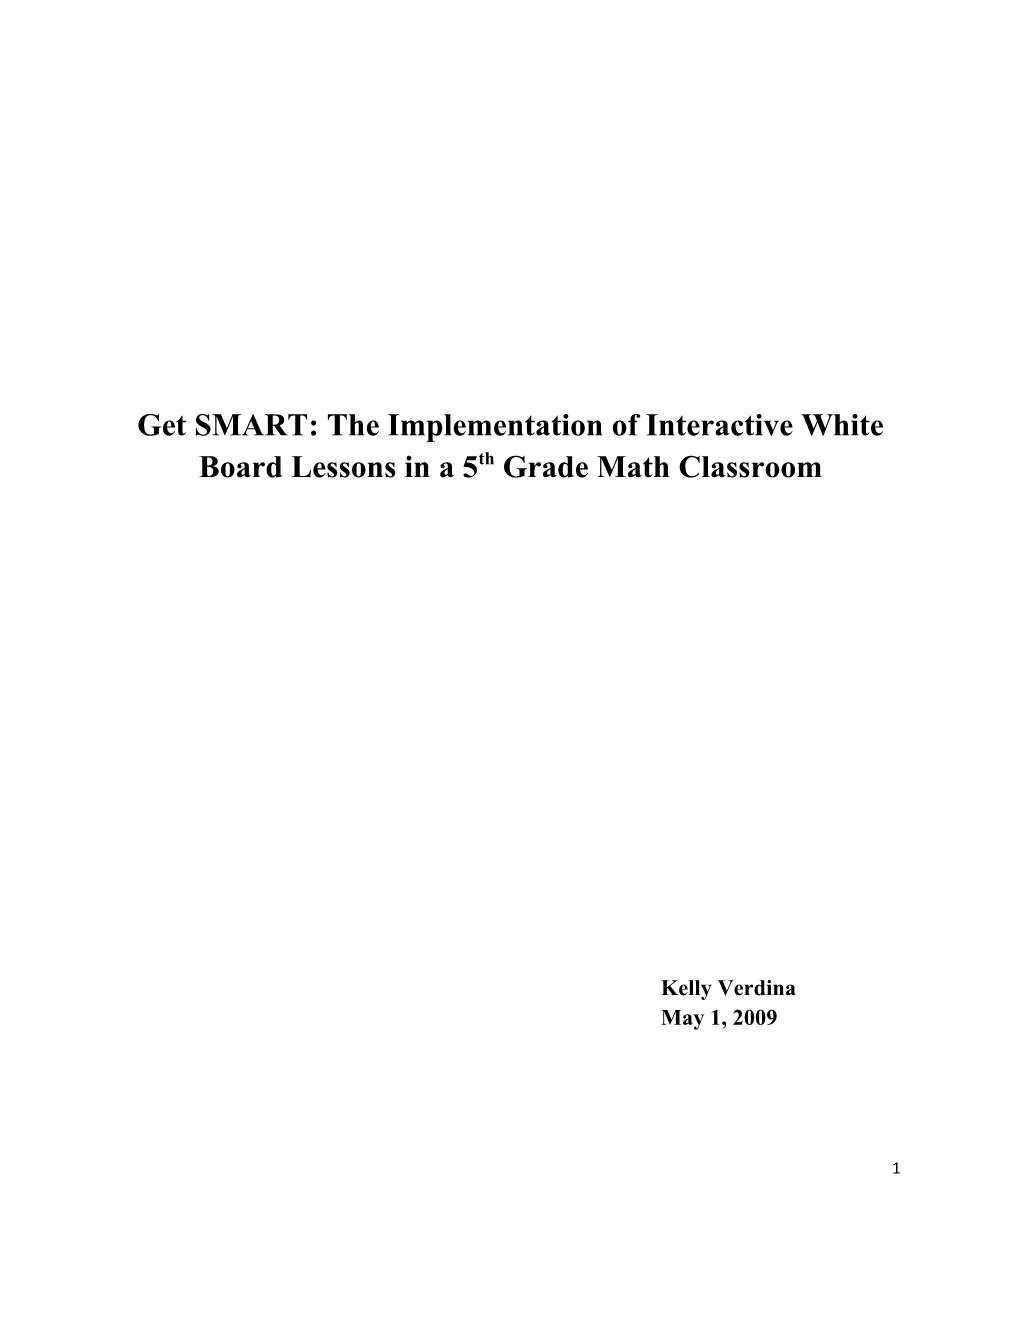 Get SMART: the Implementation of Interactive White Board Lessons in a 5Th Grade Math Classroom